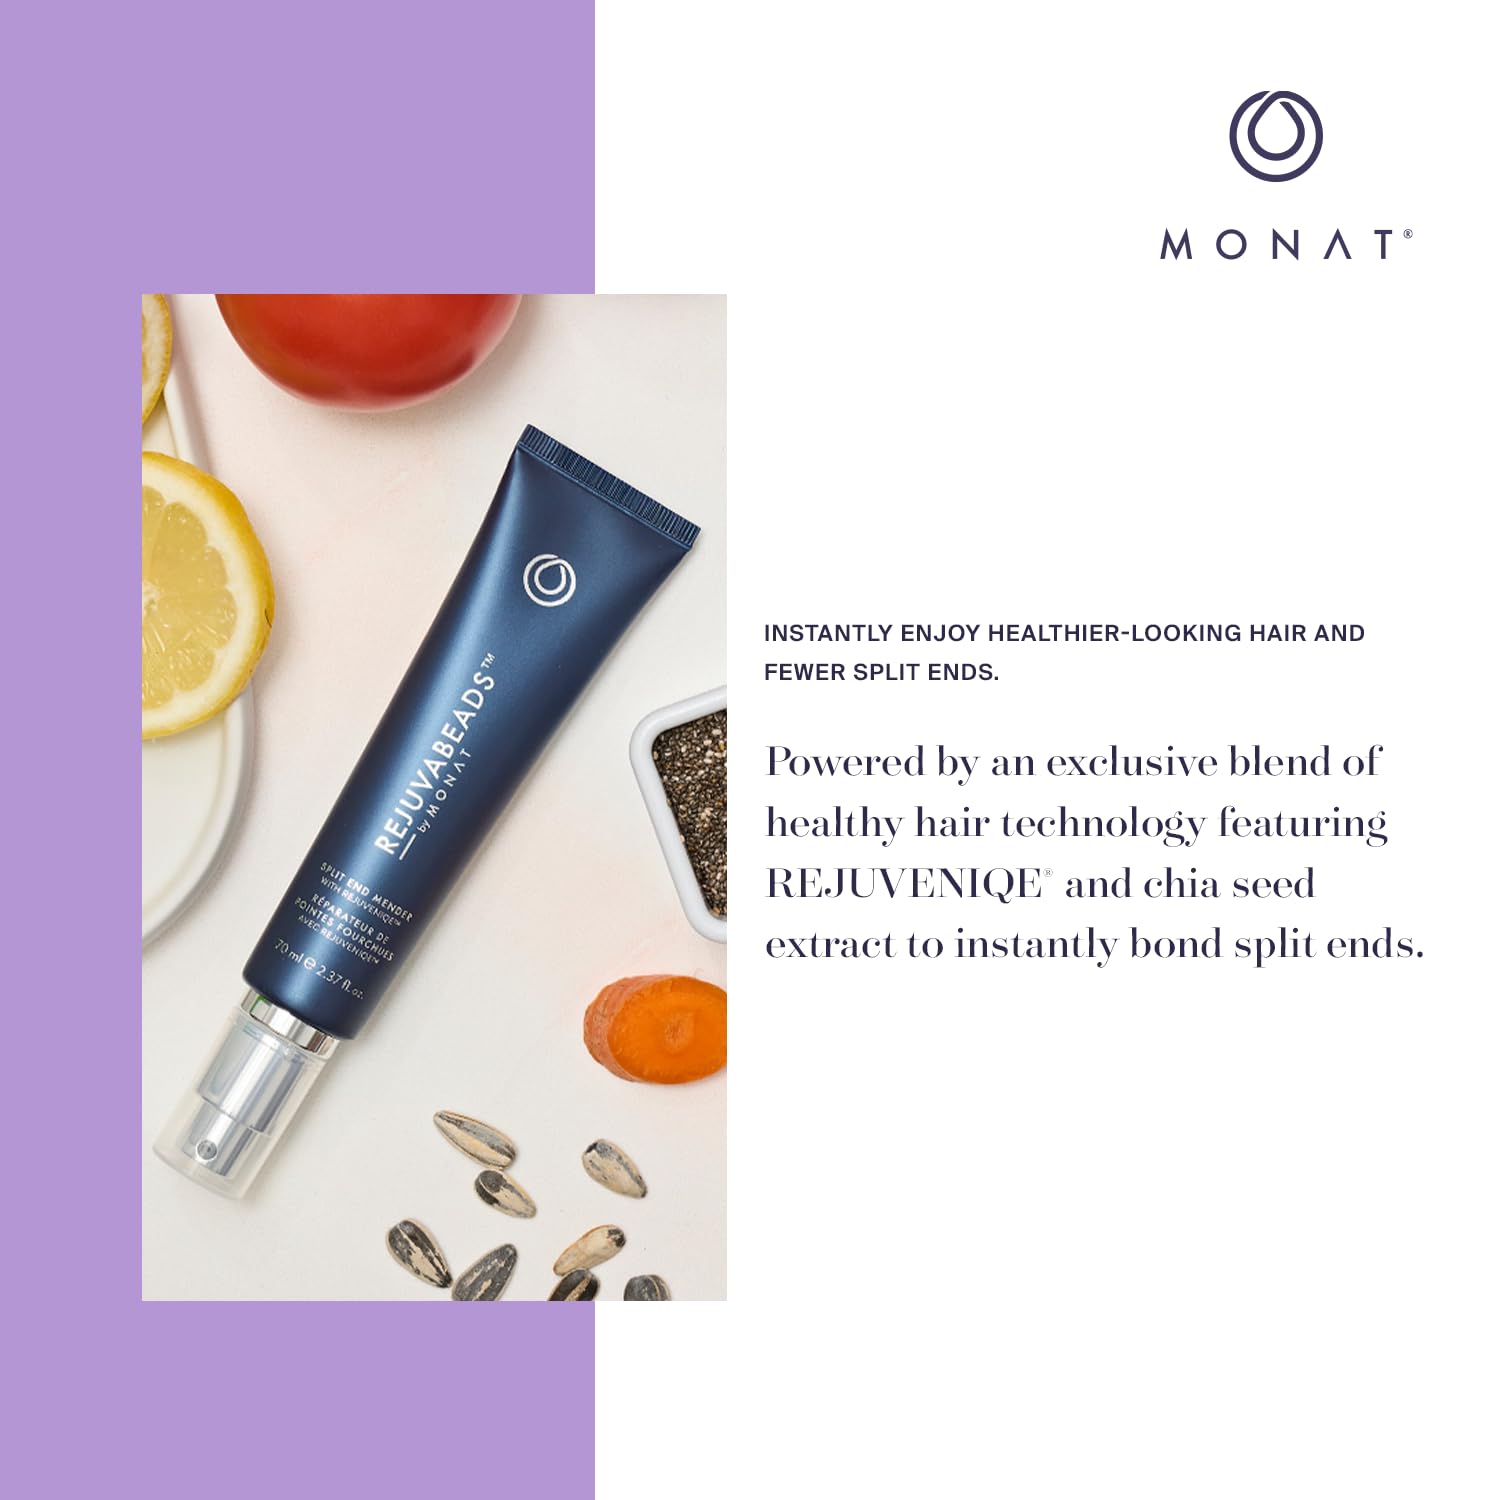 MONAT Rejuvabeads® Infused w/Rejuveniqe® - A Revolutionary Leave-in Split End Mender. Lightweight Serum Instantly Repairs Split Ends & Leaves Healthier-Looking Hair. - Net Wt. 70 ml / 2.4 fl. oz. : Beauty & Personal Care